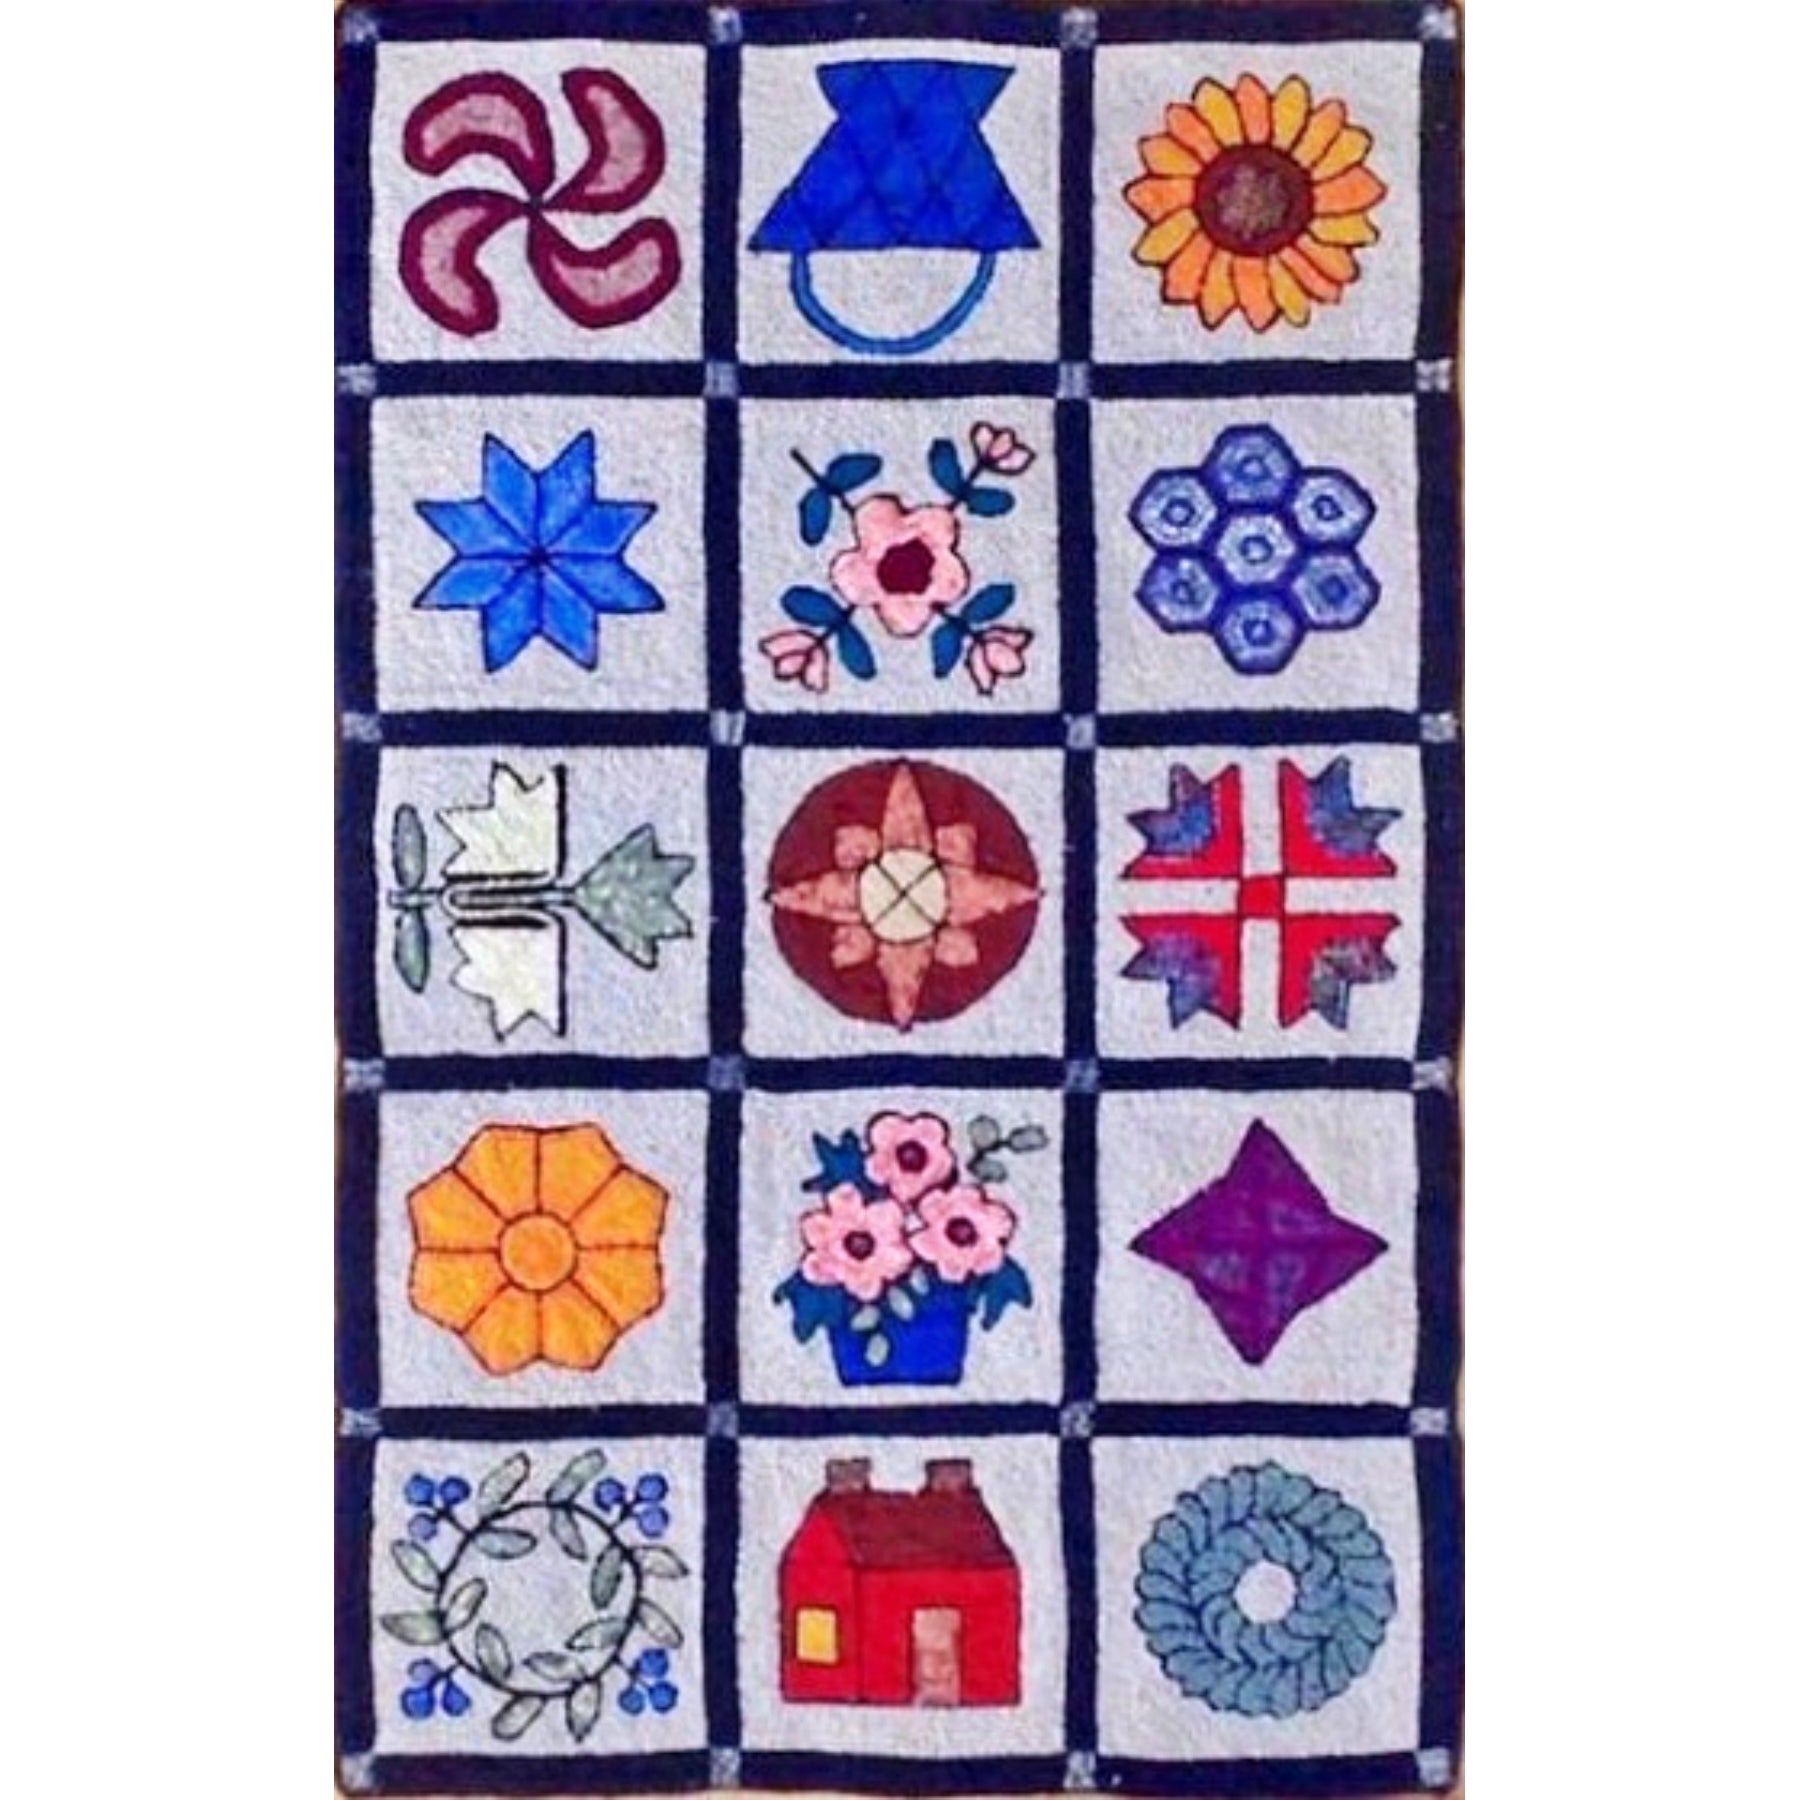 Quilt Sampler For Wide Cut, rug hooked by Biffie Norris Gallant